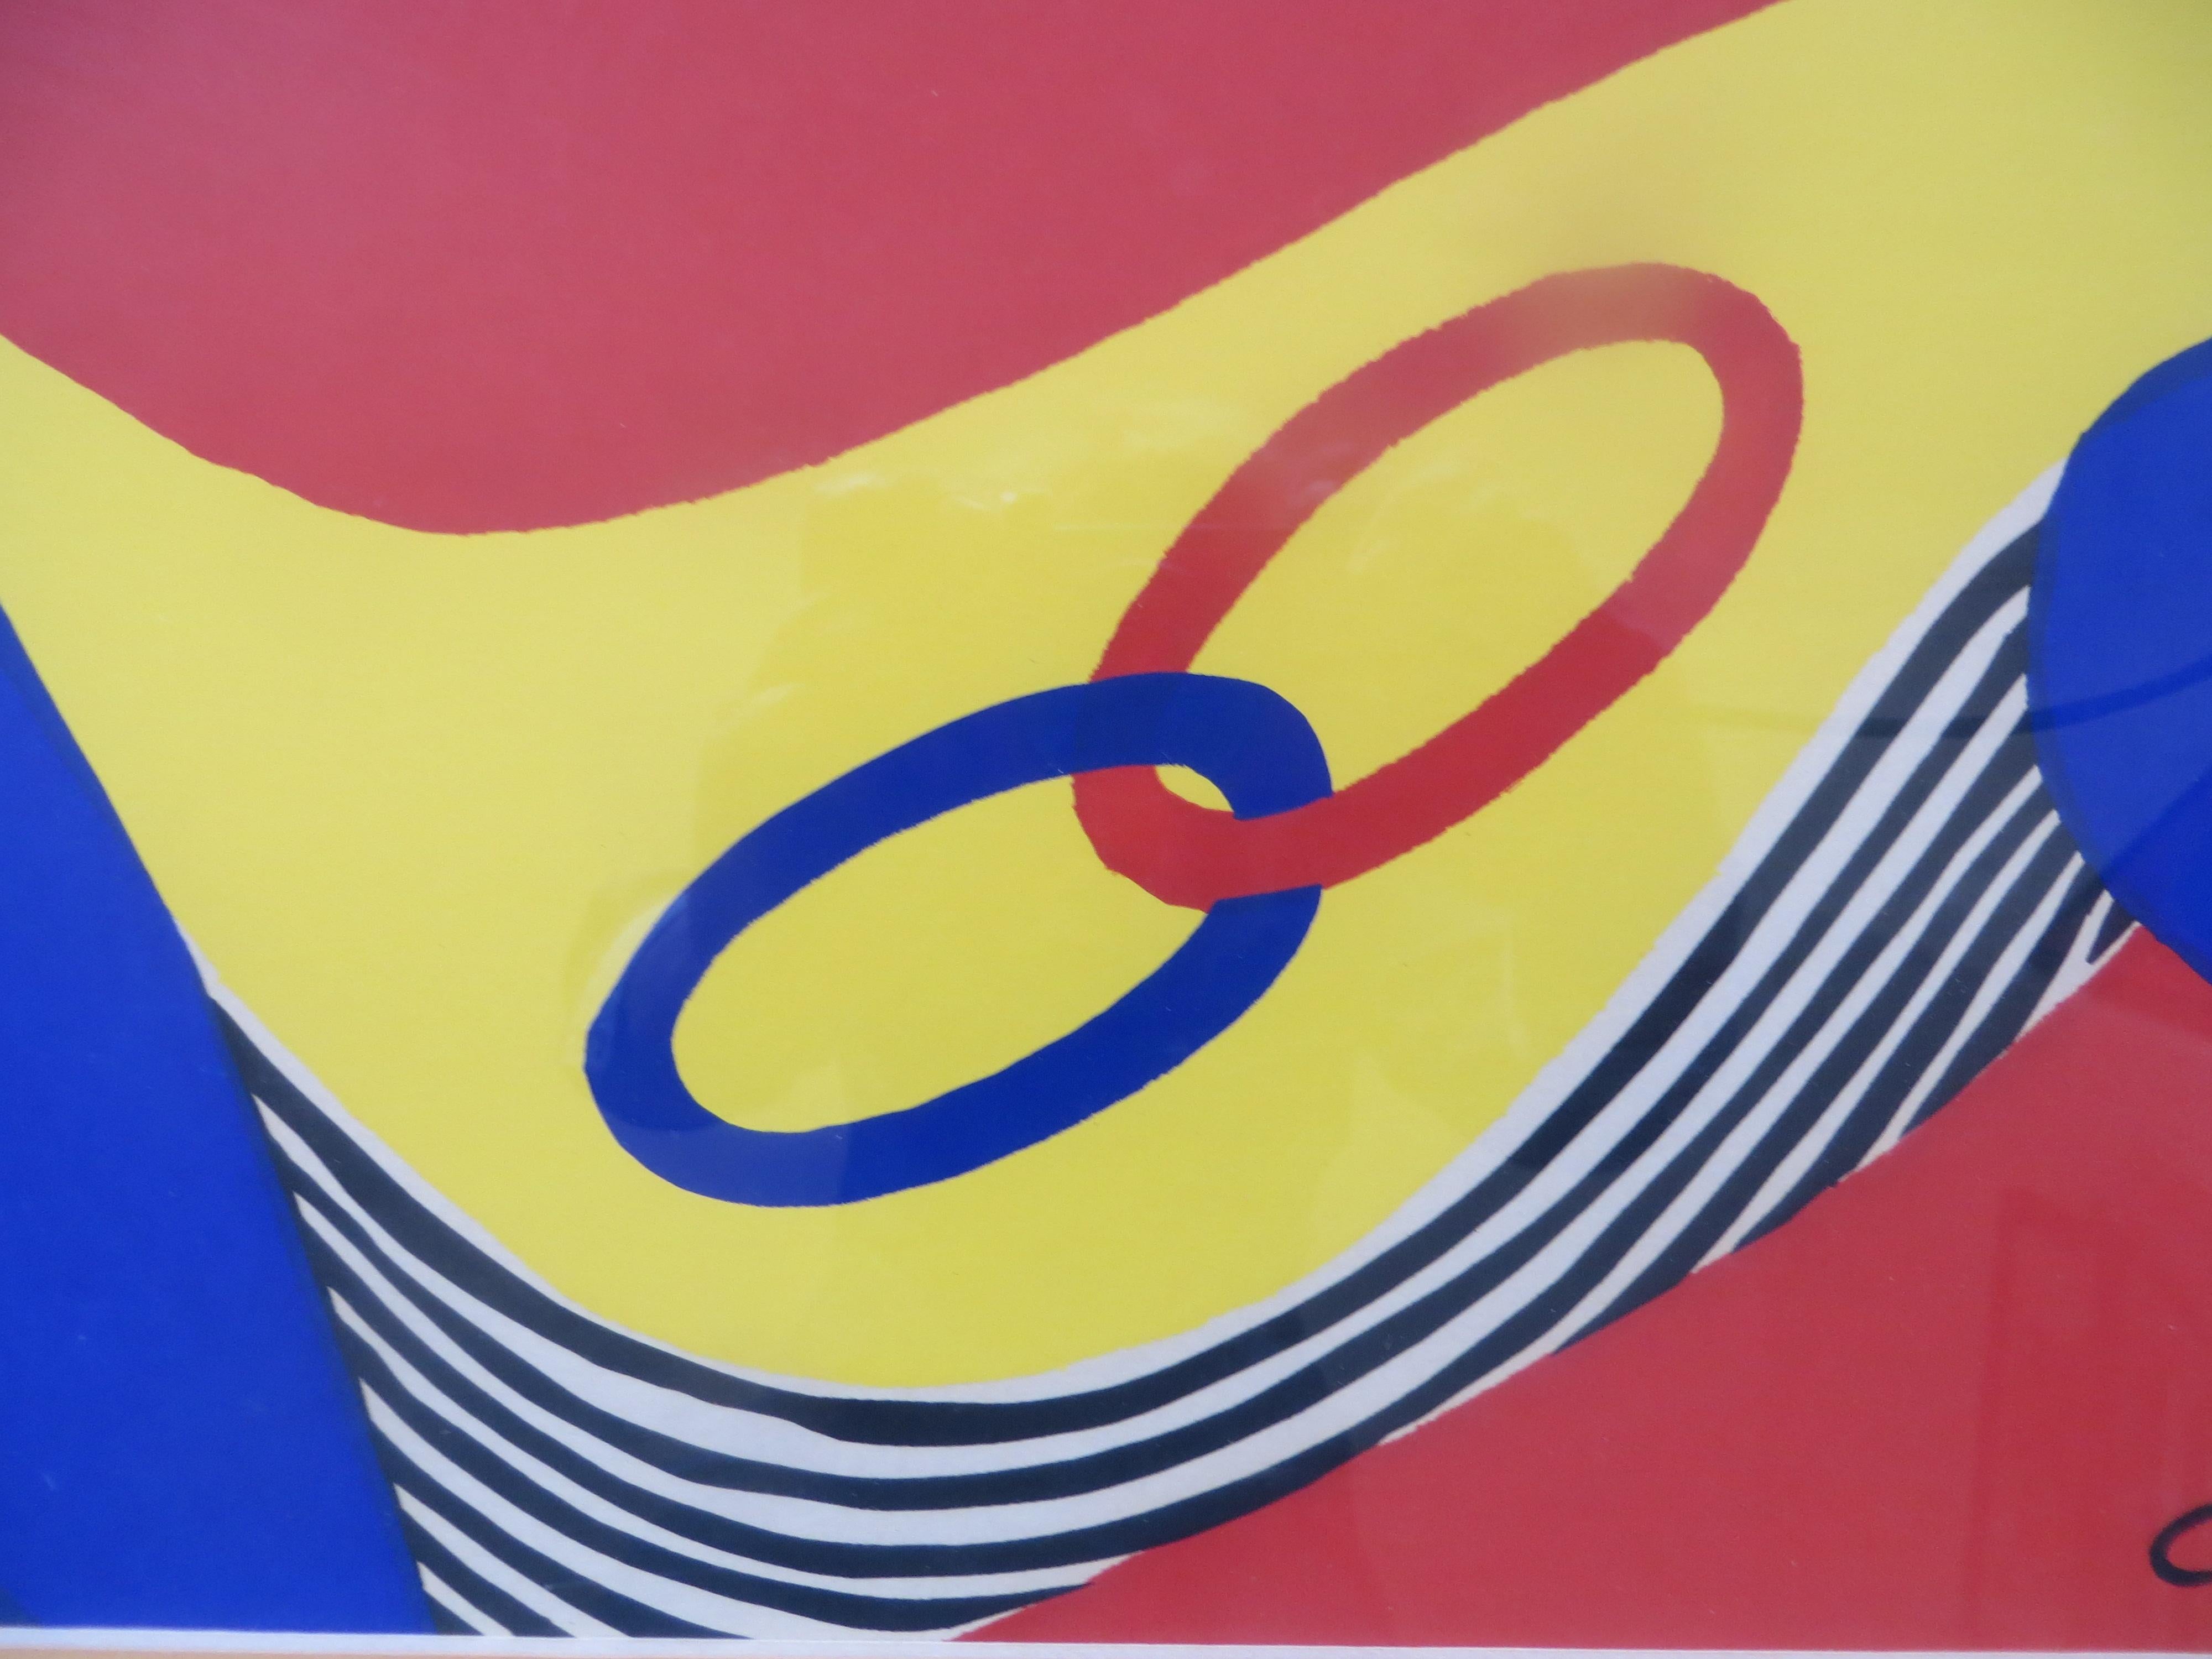 
Colorful Alexander Calder lithograph on Arches paper.Limited Edition 250/375 
Signed end dated in plate lower right.Alexander Calder was an American sculptor known both for his innovative mobiles that embrace chance in their aesthetic, and static